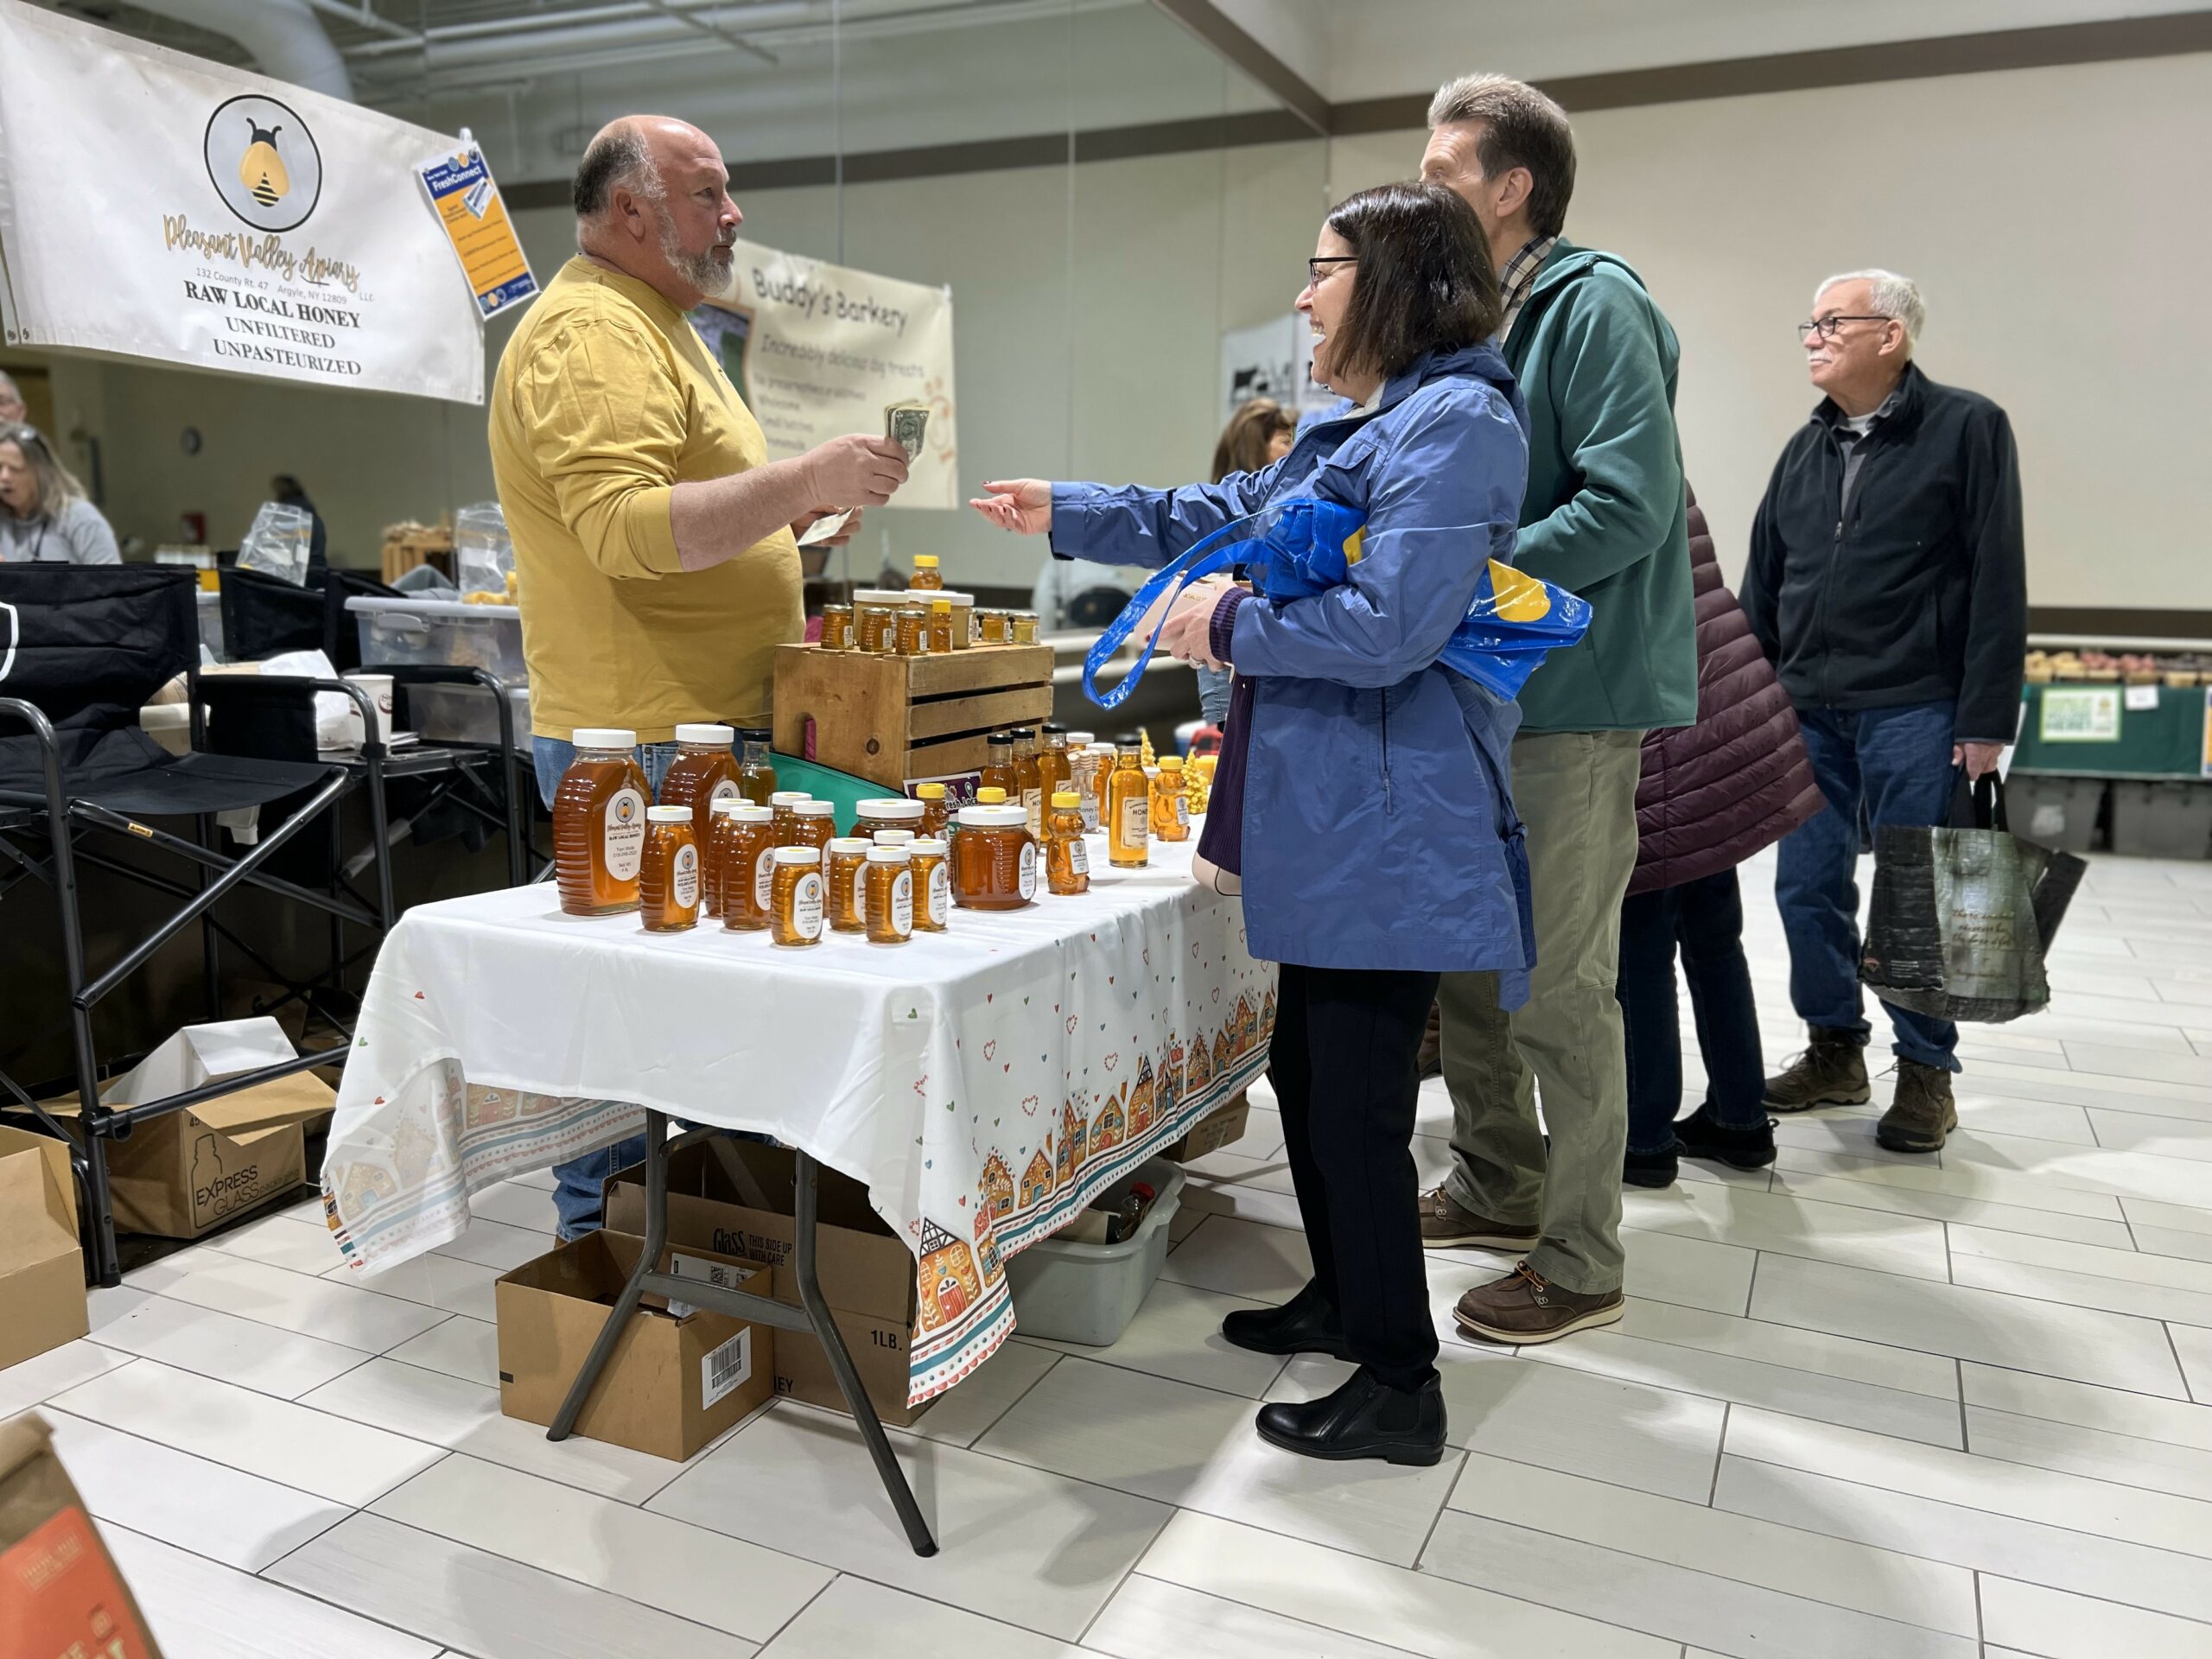 Vendor selling honey at indoor market booth.